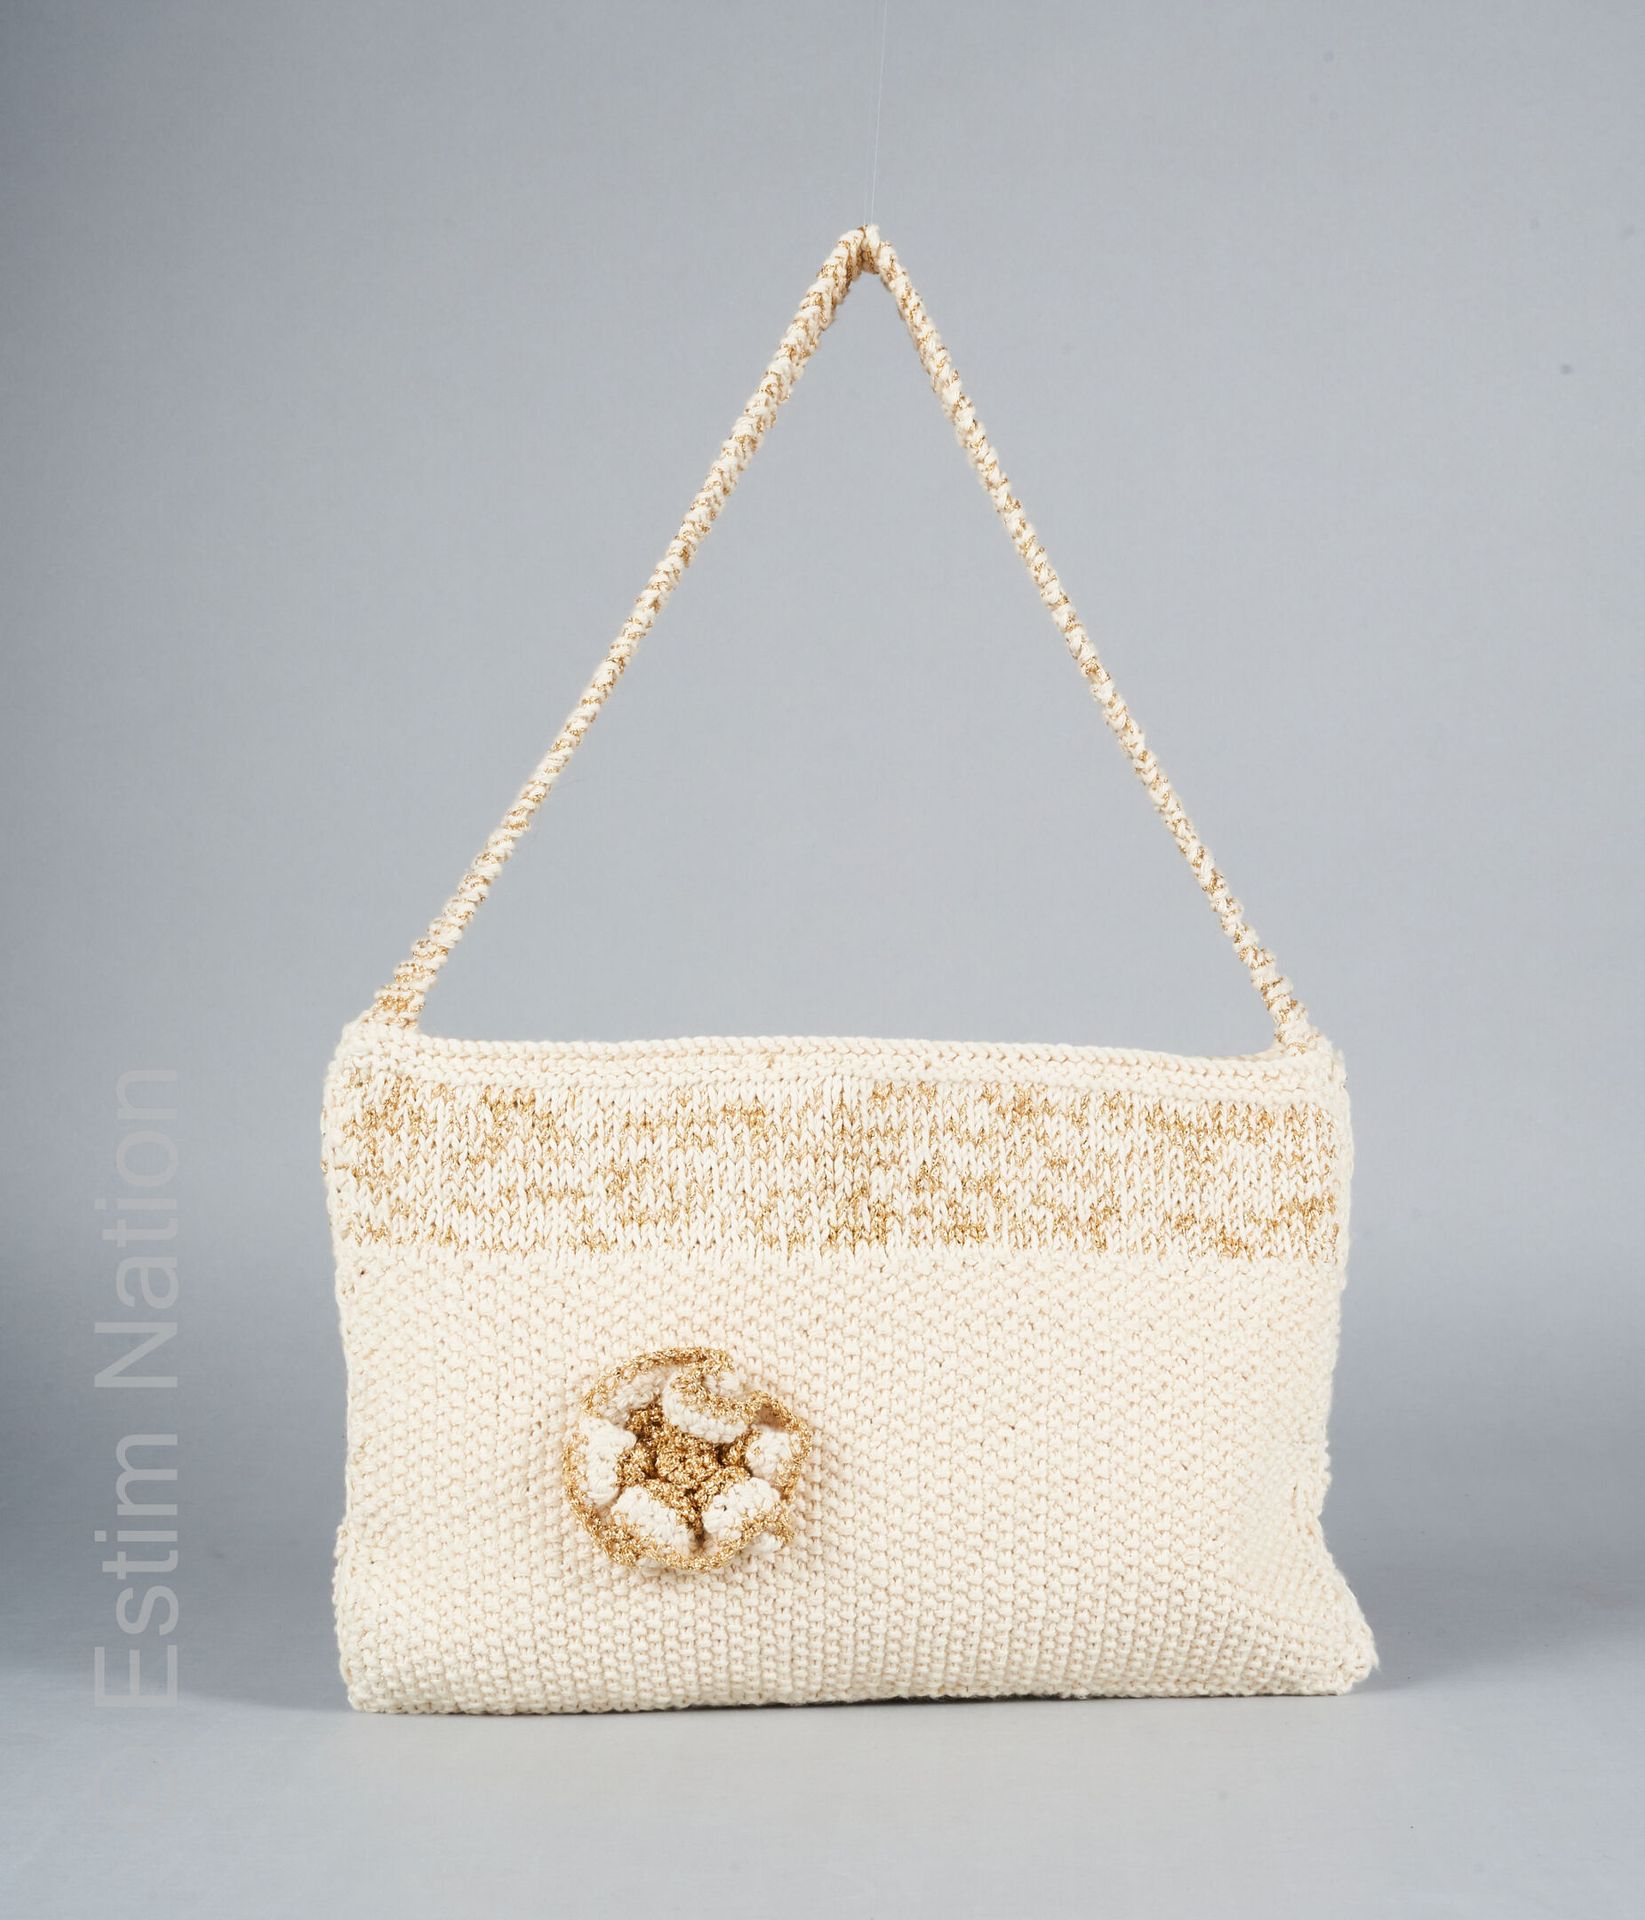 ANONYME SMALL BAG in off-white and gold knit with a roundel (18 x 29 cm)